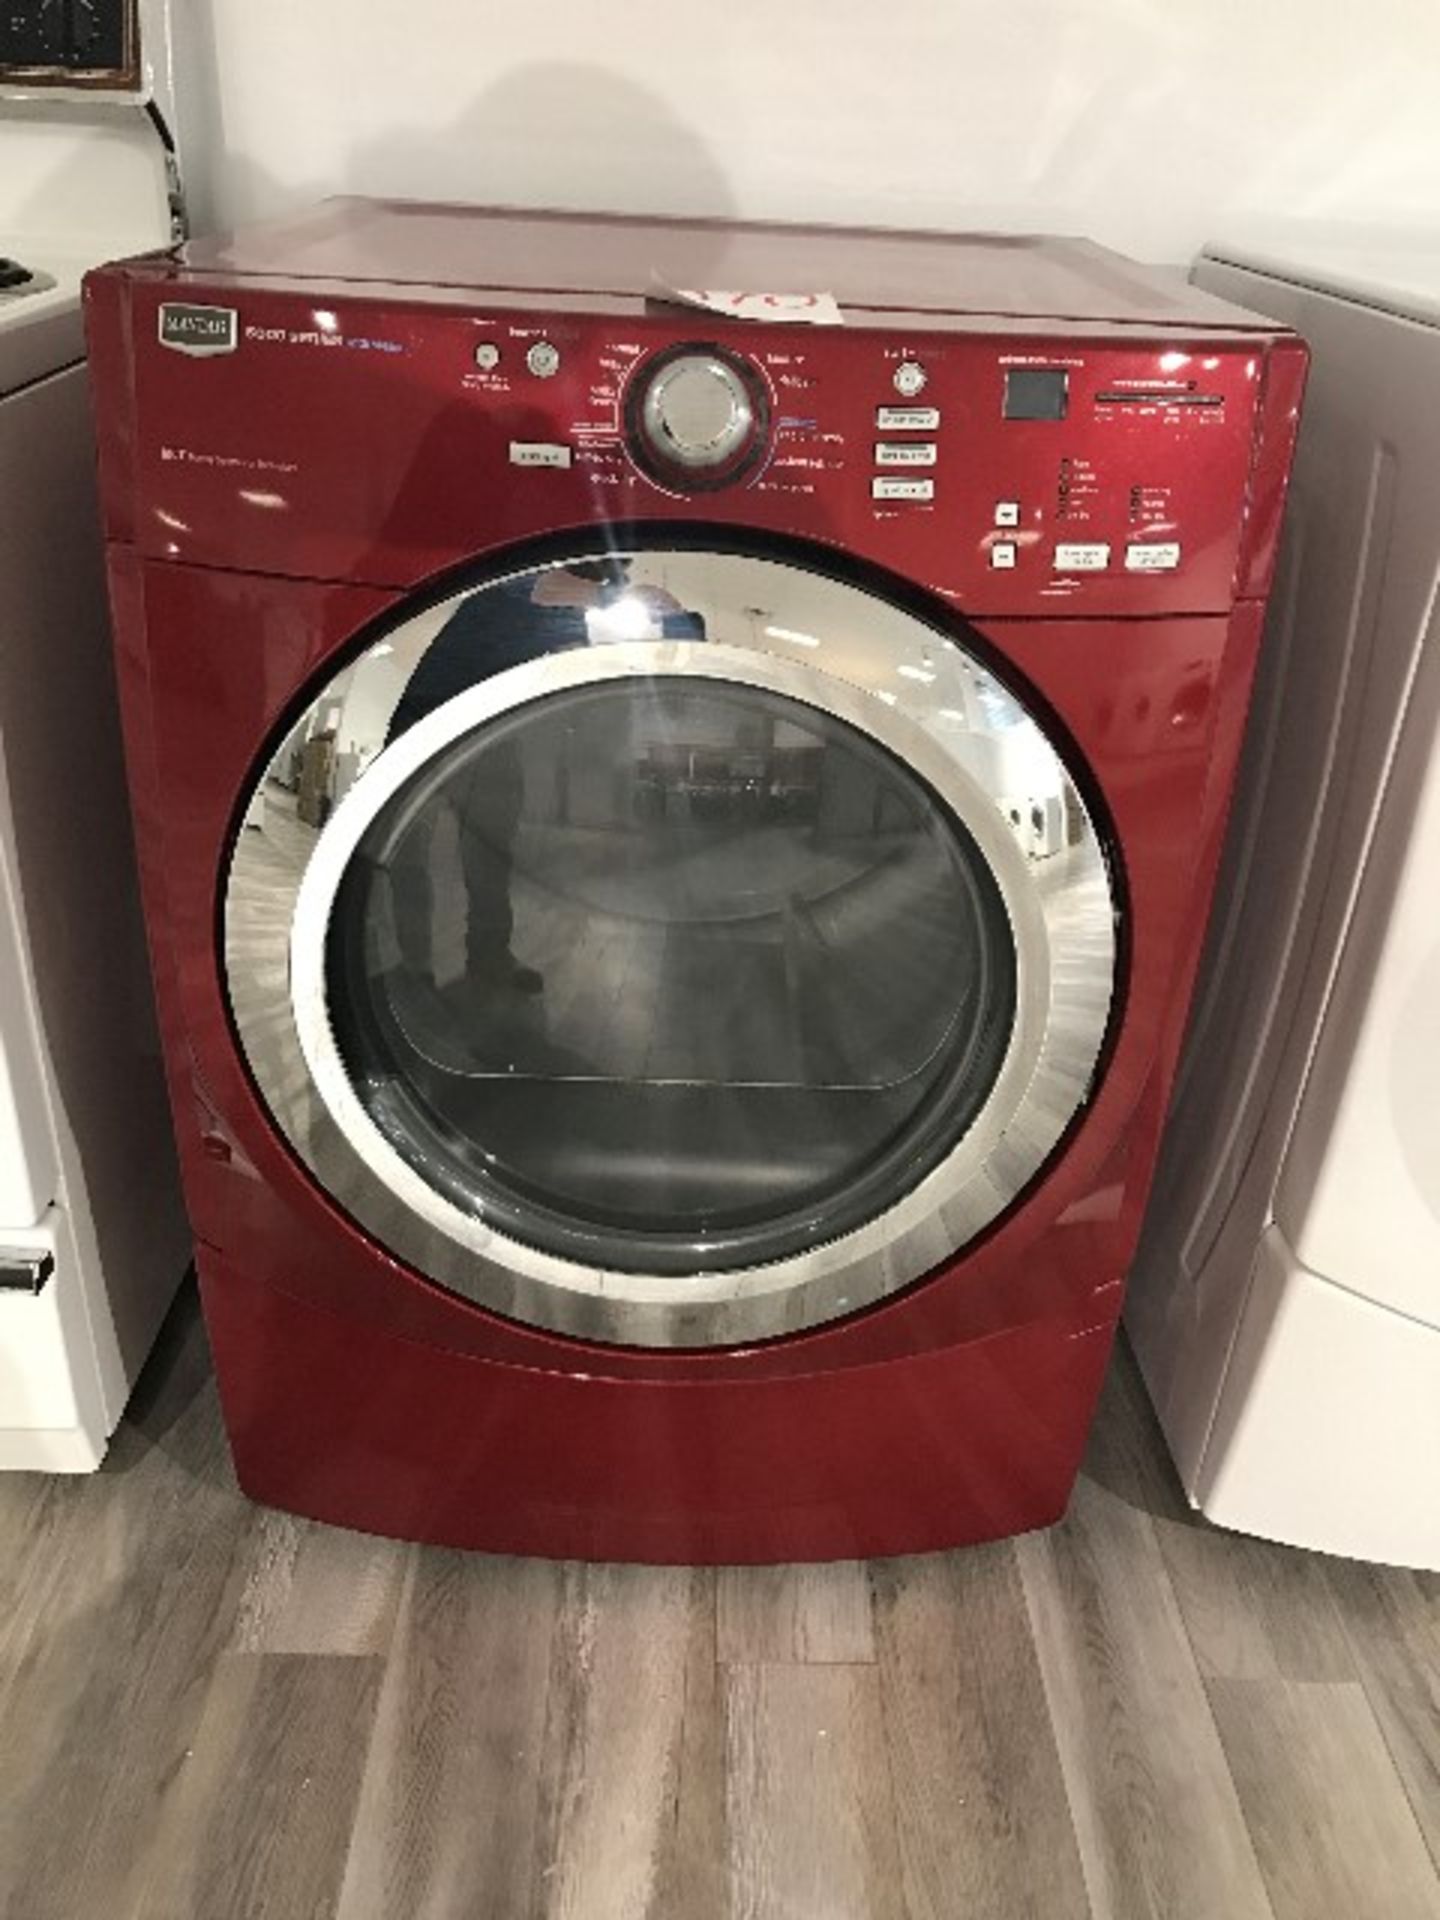 Maytag steam dryer, red, TEL QUEL,AS IS,MAY REQUIRE SERVICE & PARTS